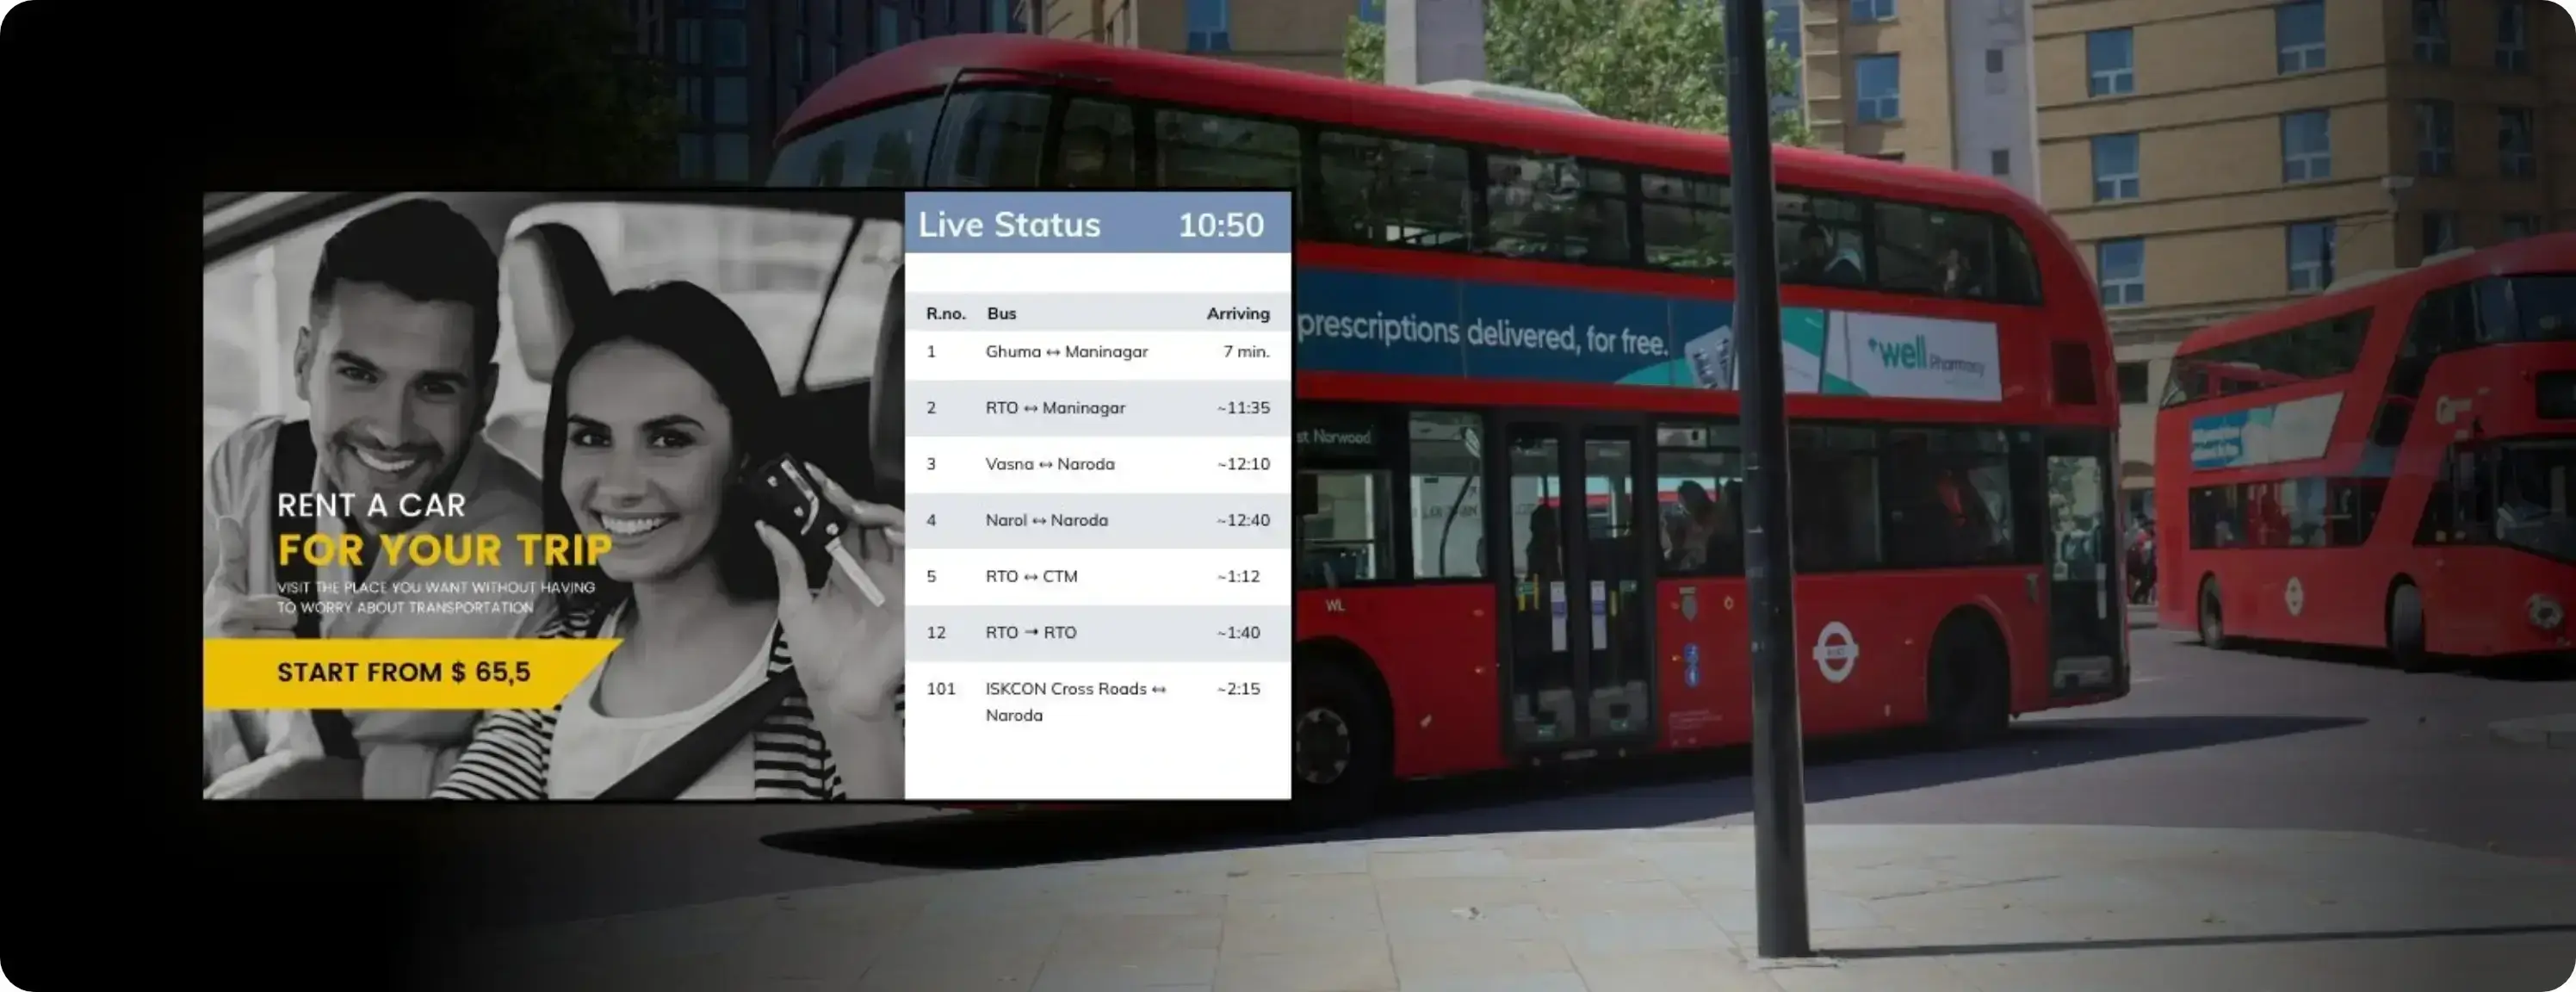 Digital Signage screen at bus stop displaying promotional creative with live arrival/departure feeds using Pickcel's Software